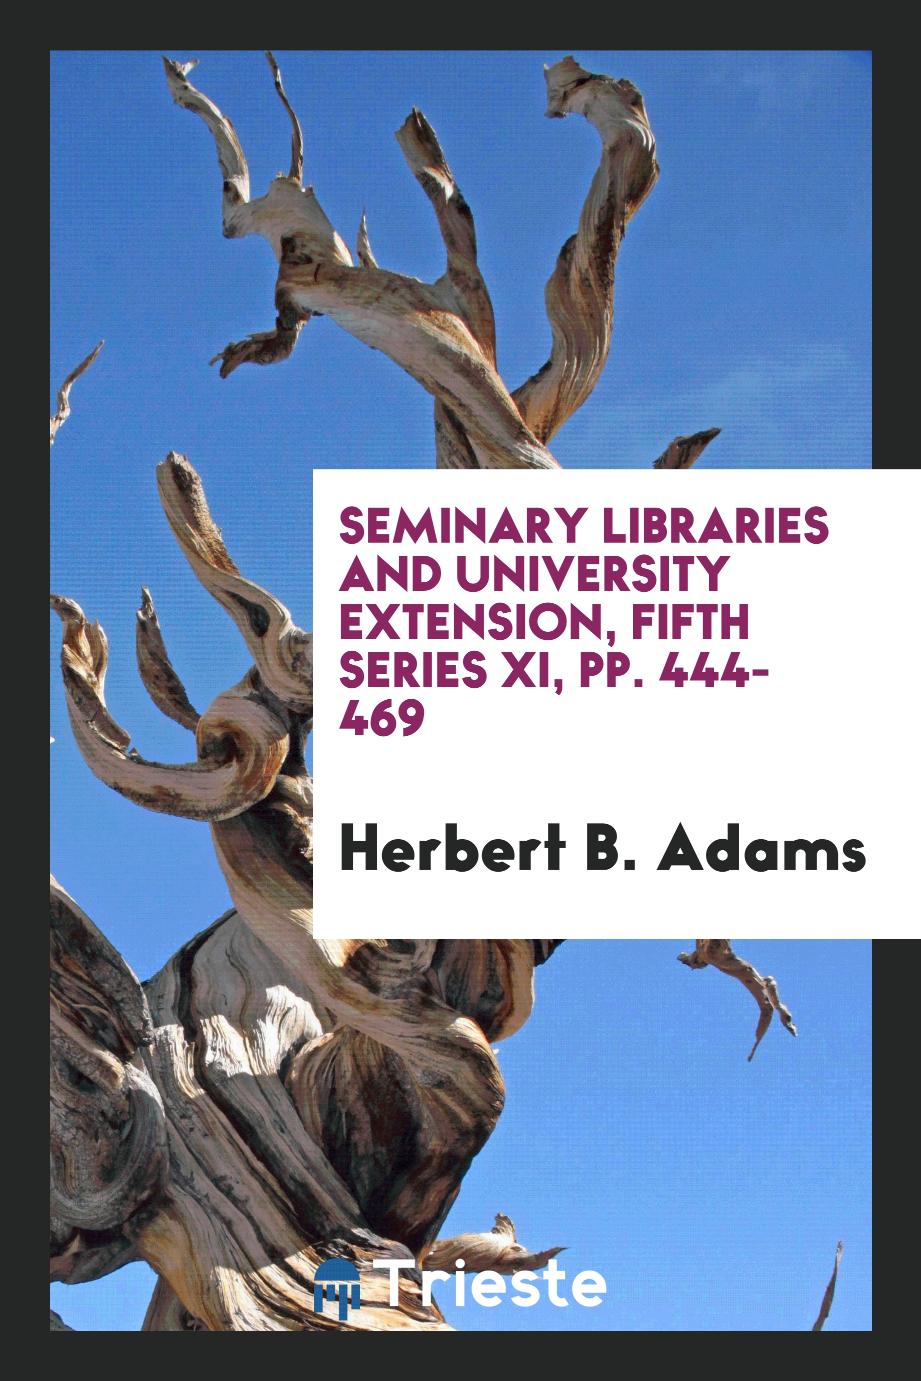 Seminary libraries and university extension, fifth series XI, pp. 444-469